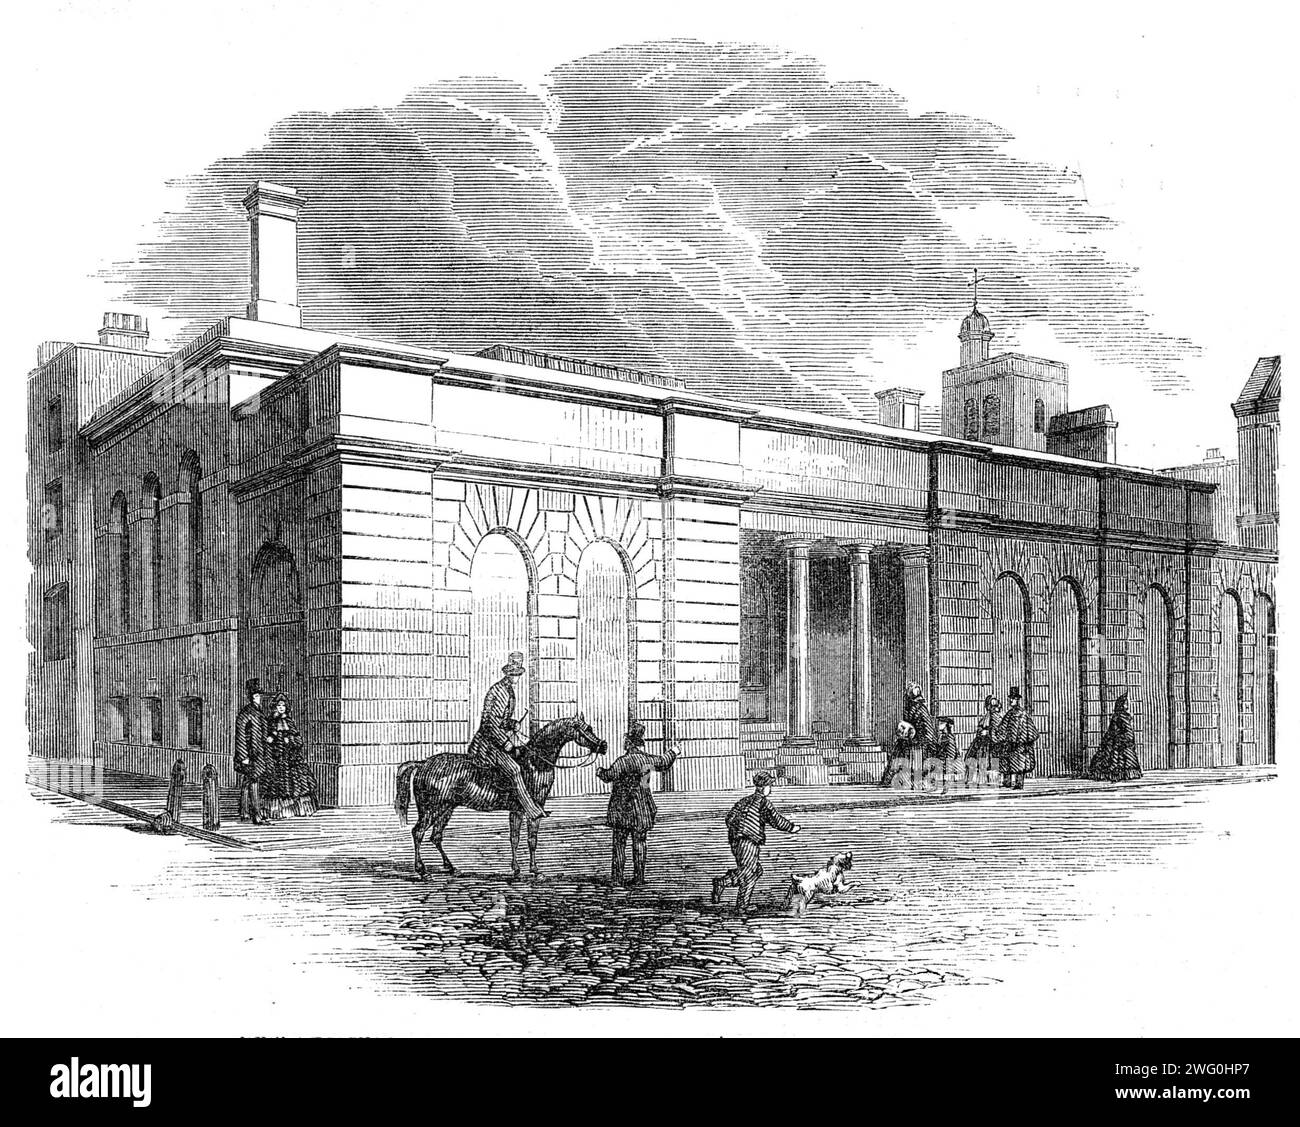 New Receiving Room at St. Bartholomew's Hospital, West Smithfield, [London], 1862. The '...new hall or receiving-room...is seen externally as a continuation of the facade of the original front...The approach to this hall is by a short colonnade...From this colonnade there are two doors of exit and entrance - one for males, the other for females. On entering this unpretending portal or portals, we are struck with the immense size of the room, its dimensions being nearly 100ft. long and about 35ft. wide. In this hall the public are permitted to receive medical and surgical aid without introducti Stock Photo